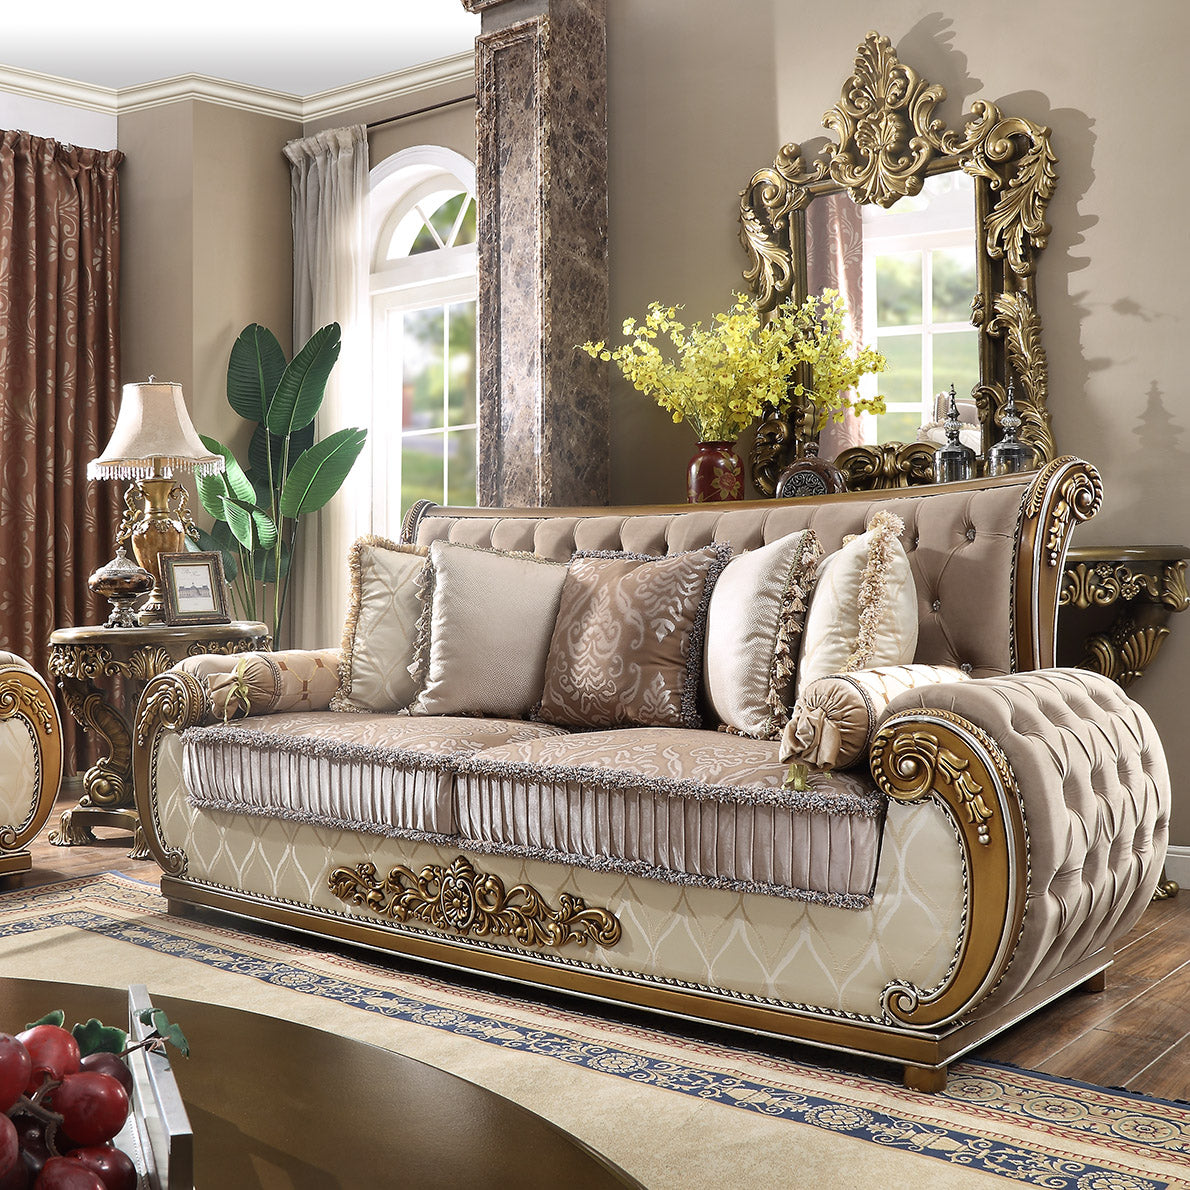 Fabric Sofa in Brown Finish S25 European Traditional Victorian